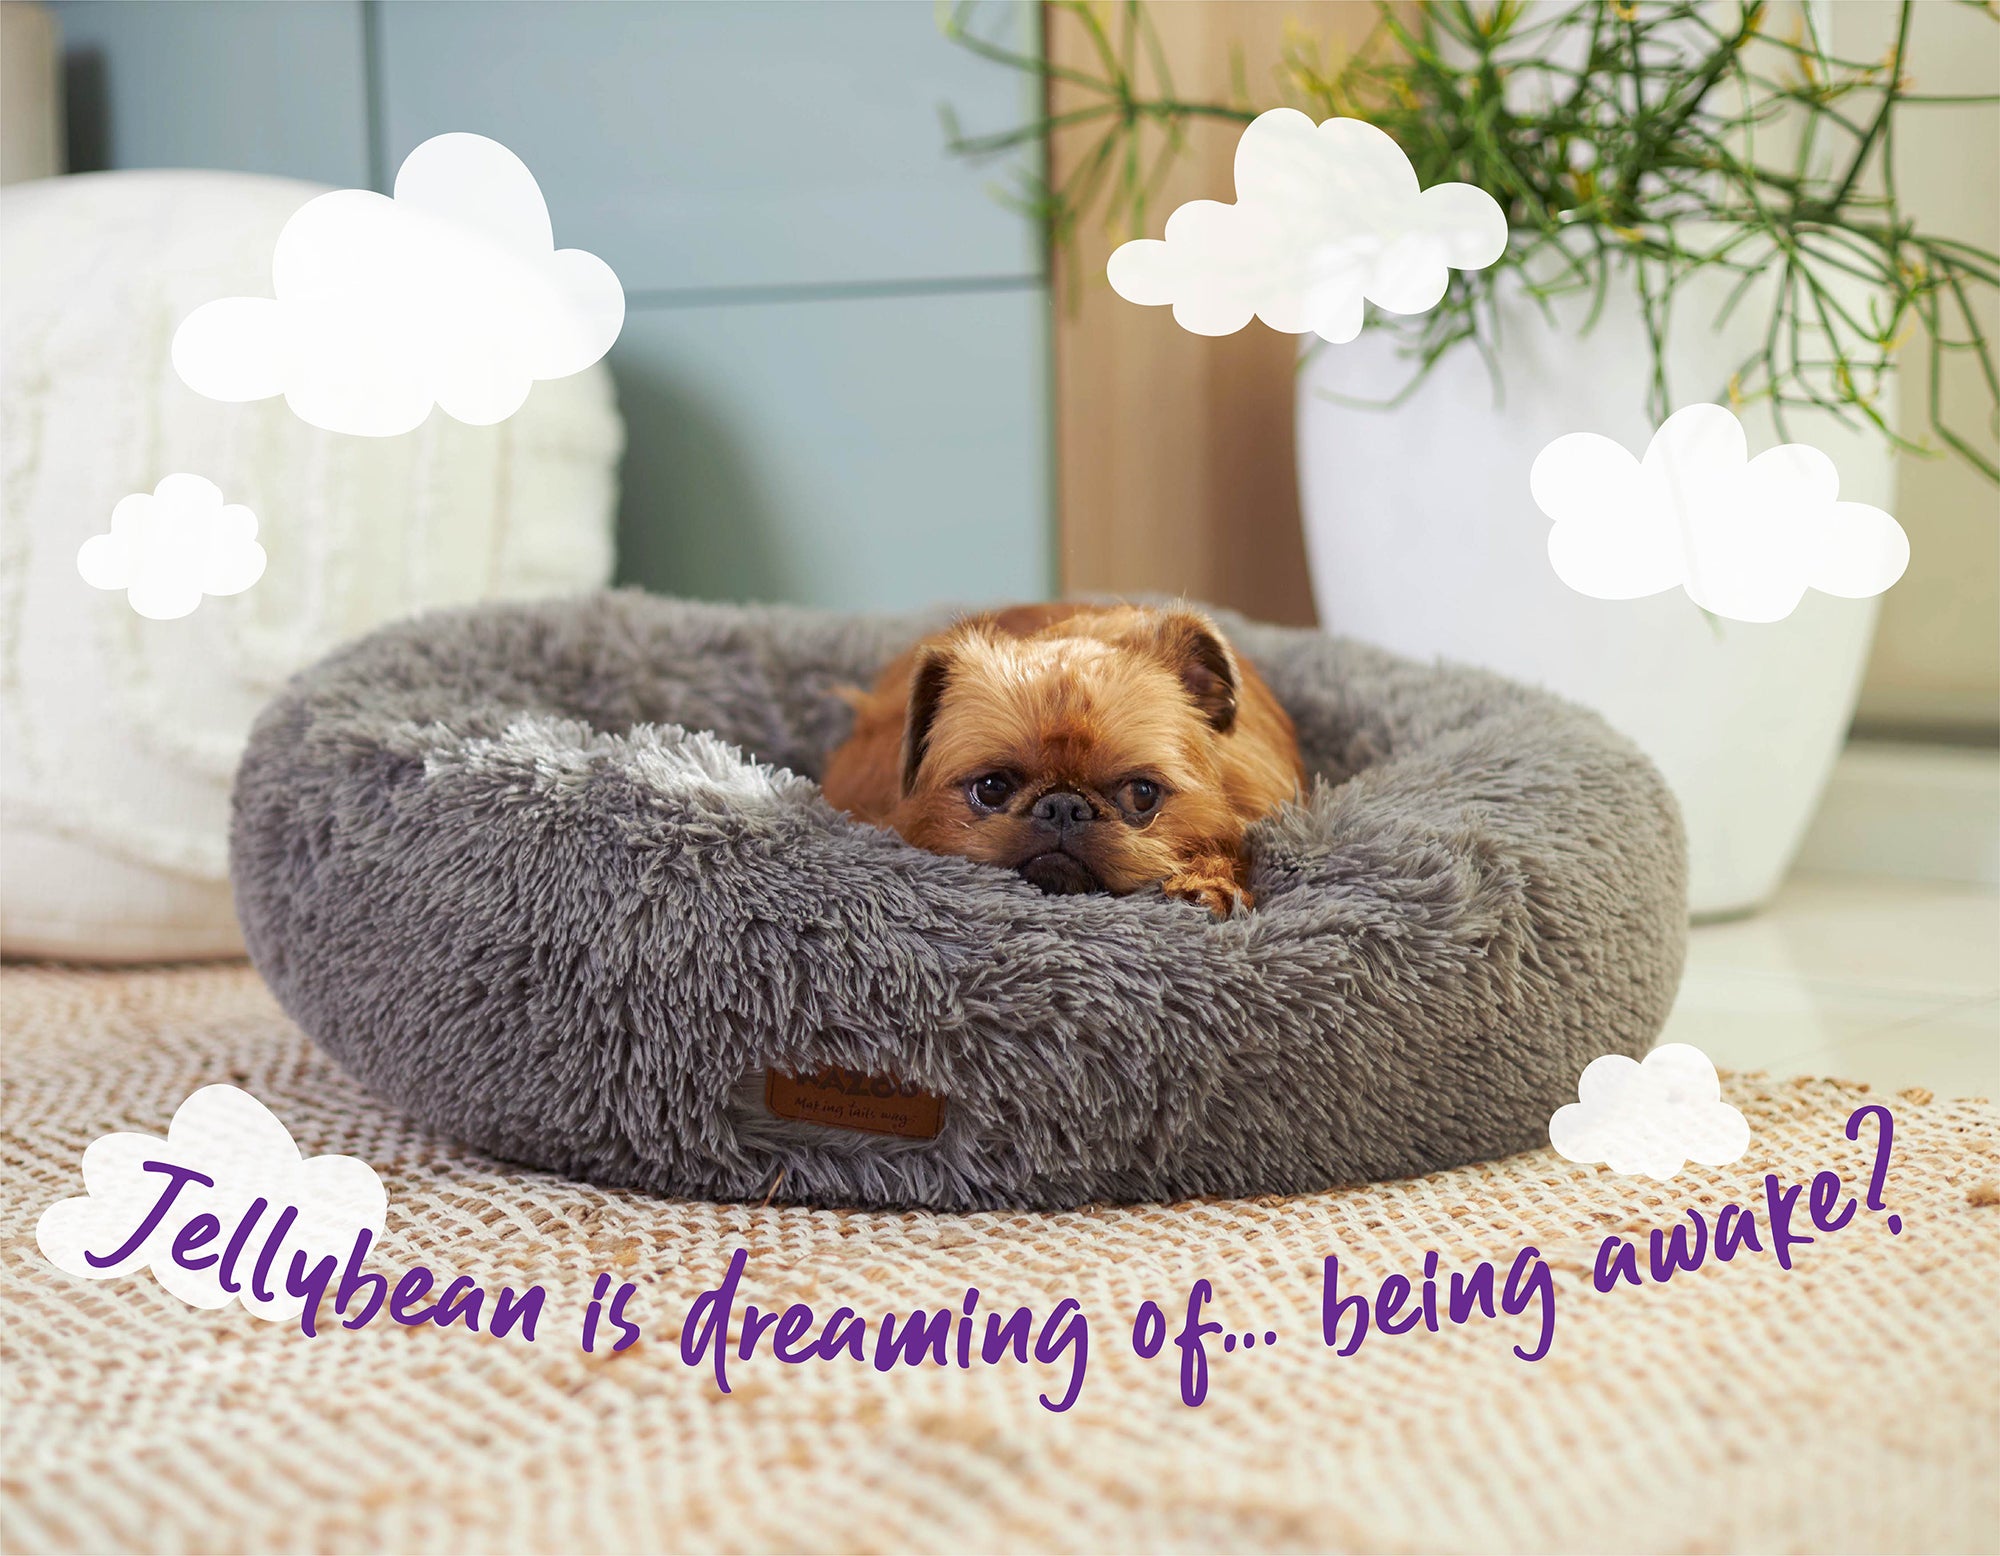 Small Griffon Bruxellois snuggled into a fluffy bed with his head resting on the dog bed. 'Jellybean is dreaming of... being awake?'